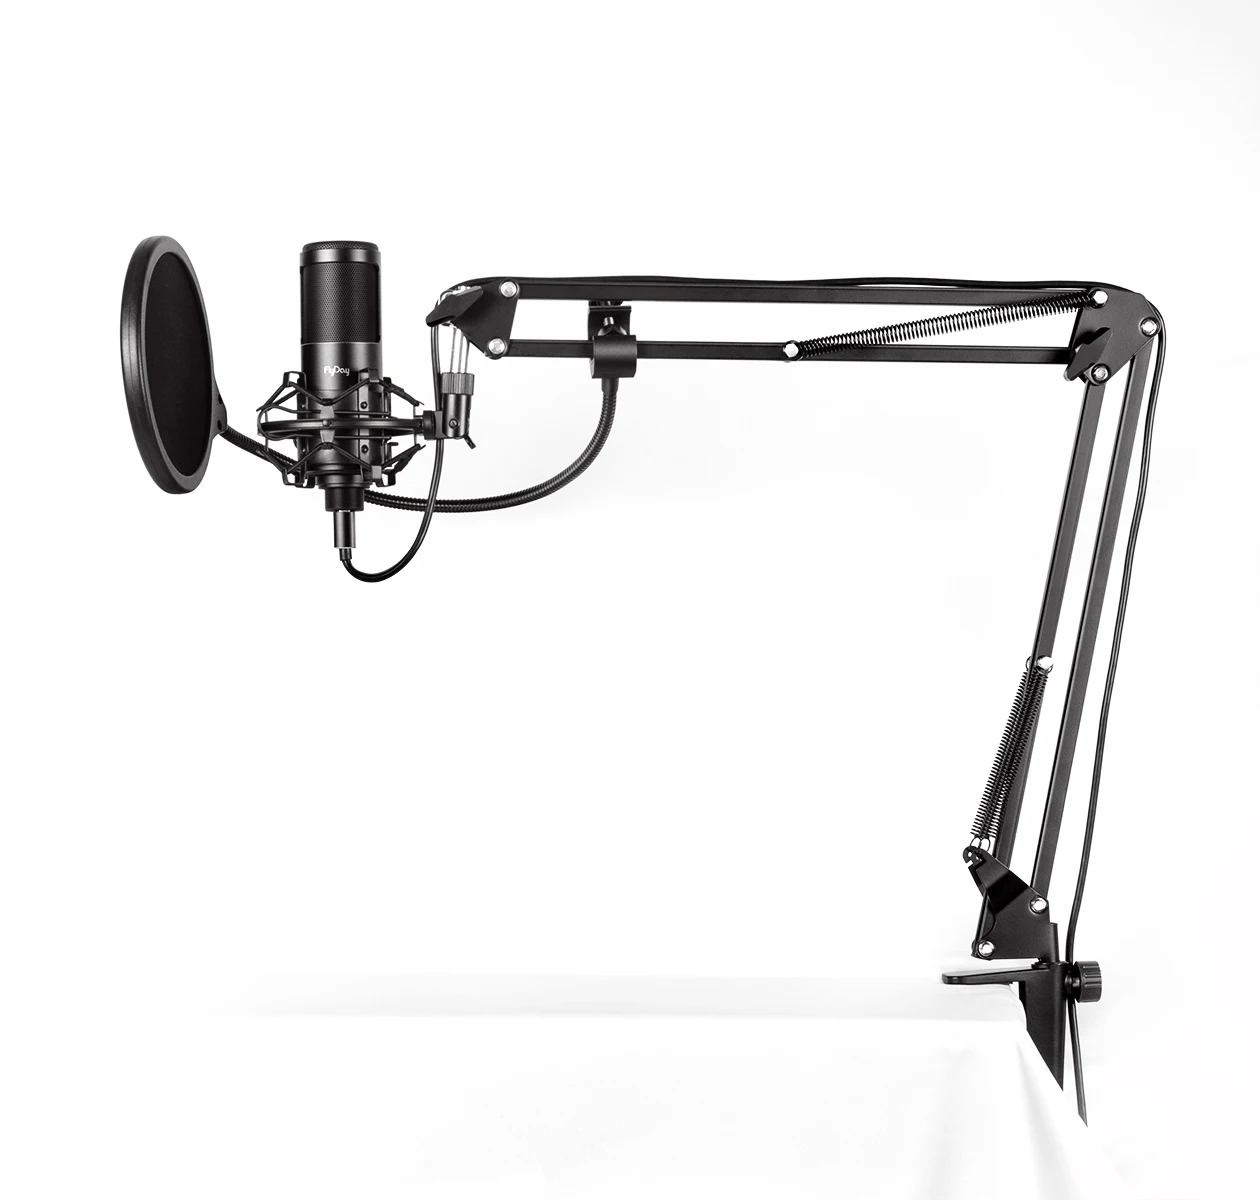 

Flyday F1 USB Condenser OEM Gaming Mic, Singing Recording Studio Podcast Microphone Kit for PC Laptop with Arm Stand